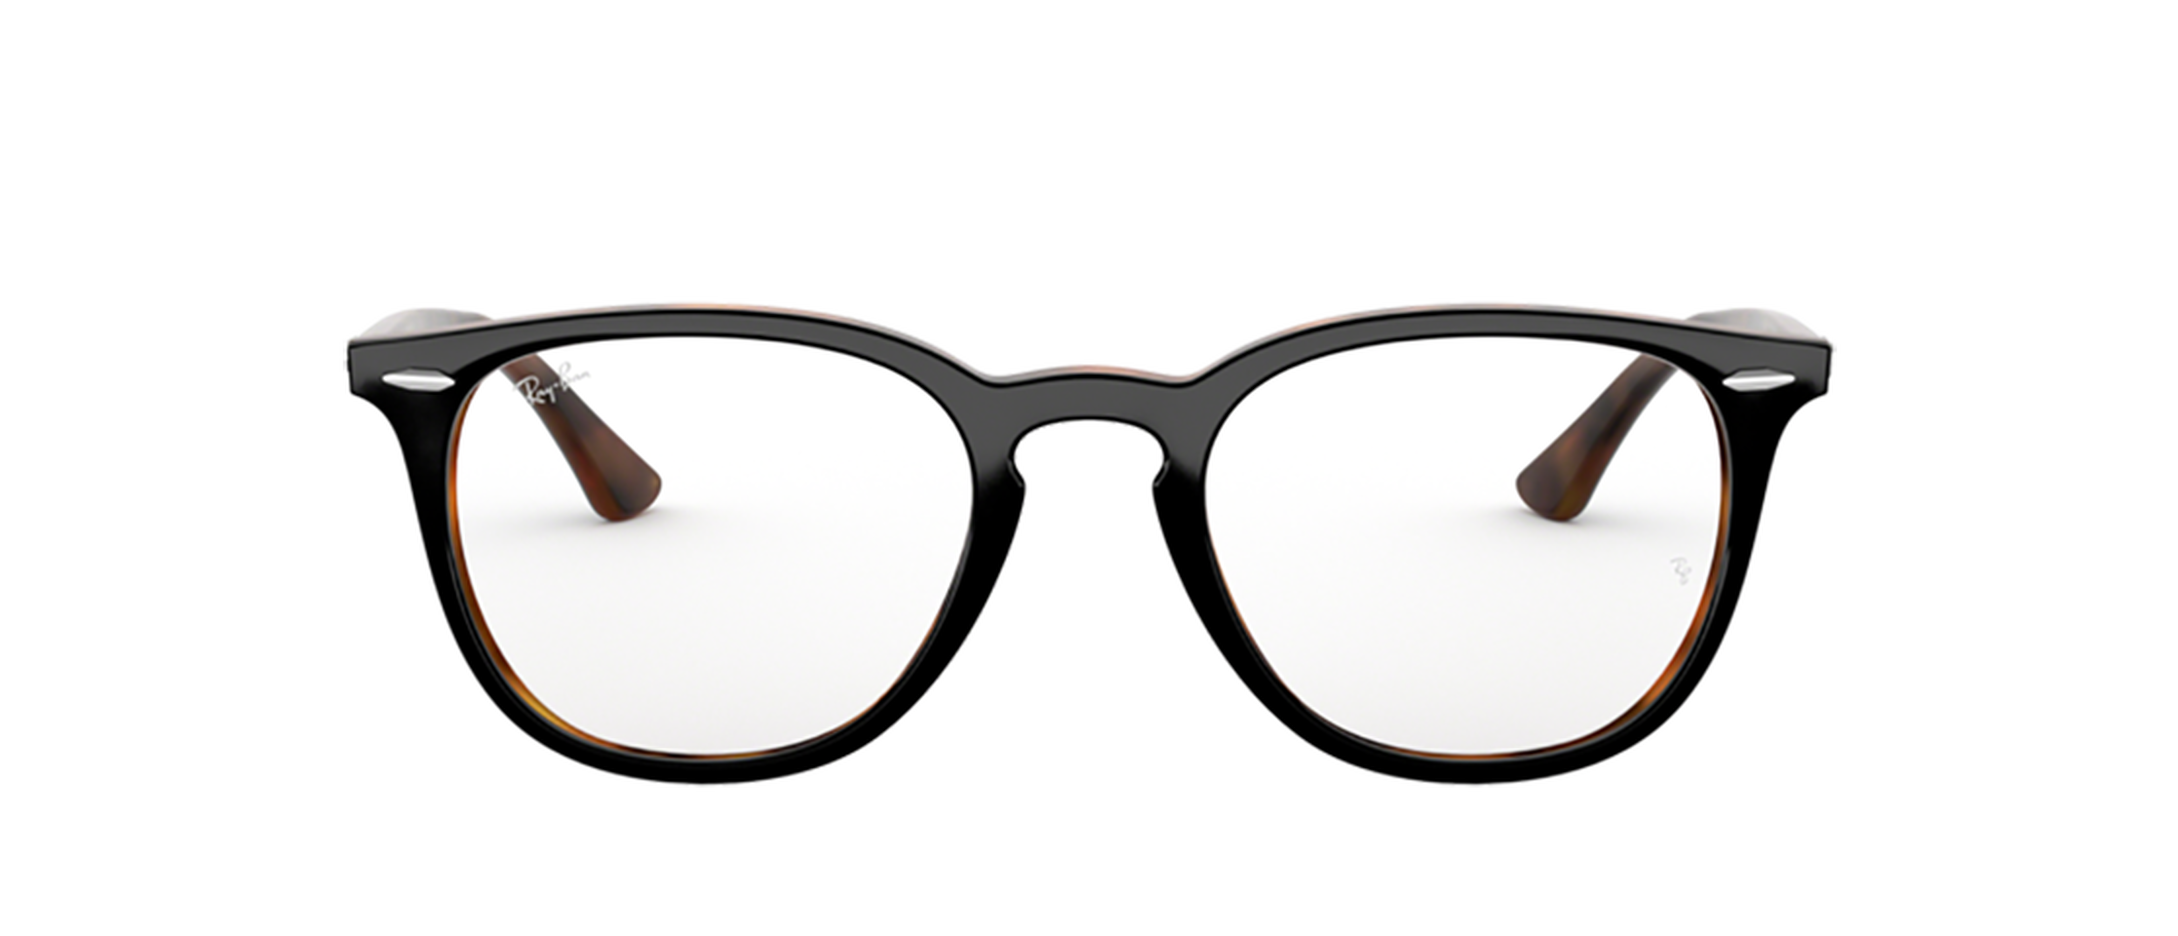 Ray Ban Rx7159 Glasses Free Shipping And Returns Eyeconic